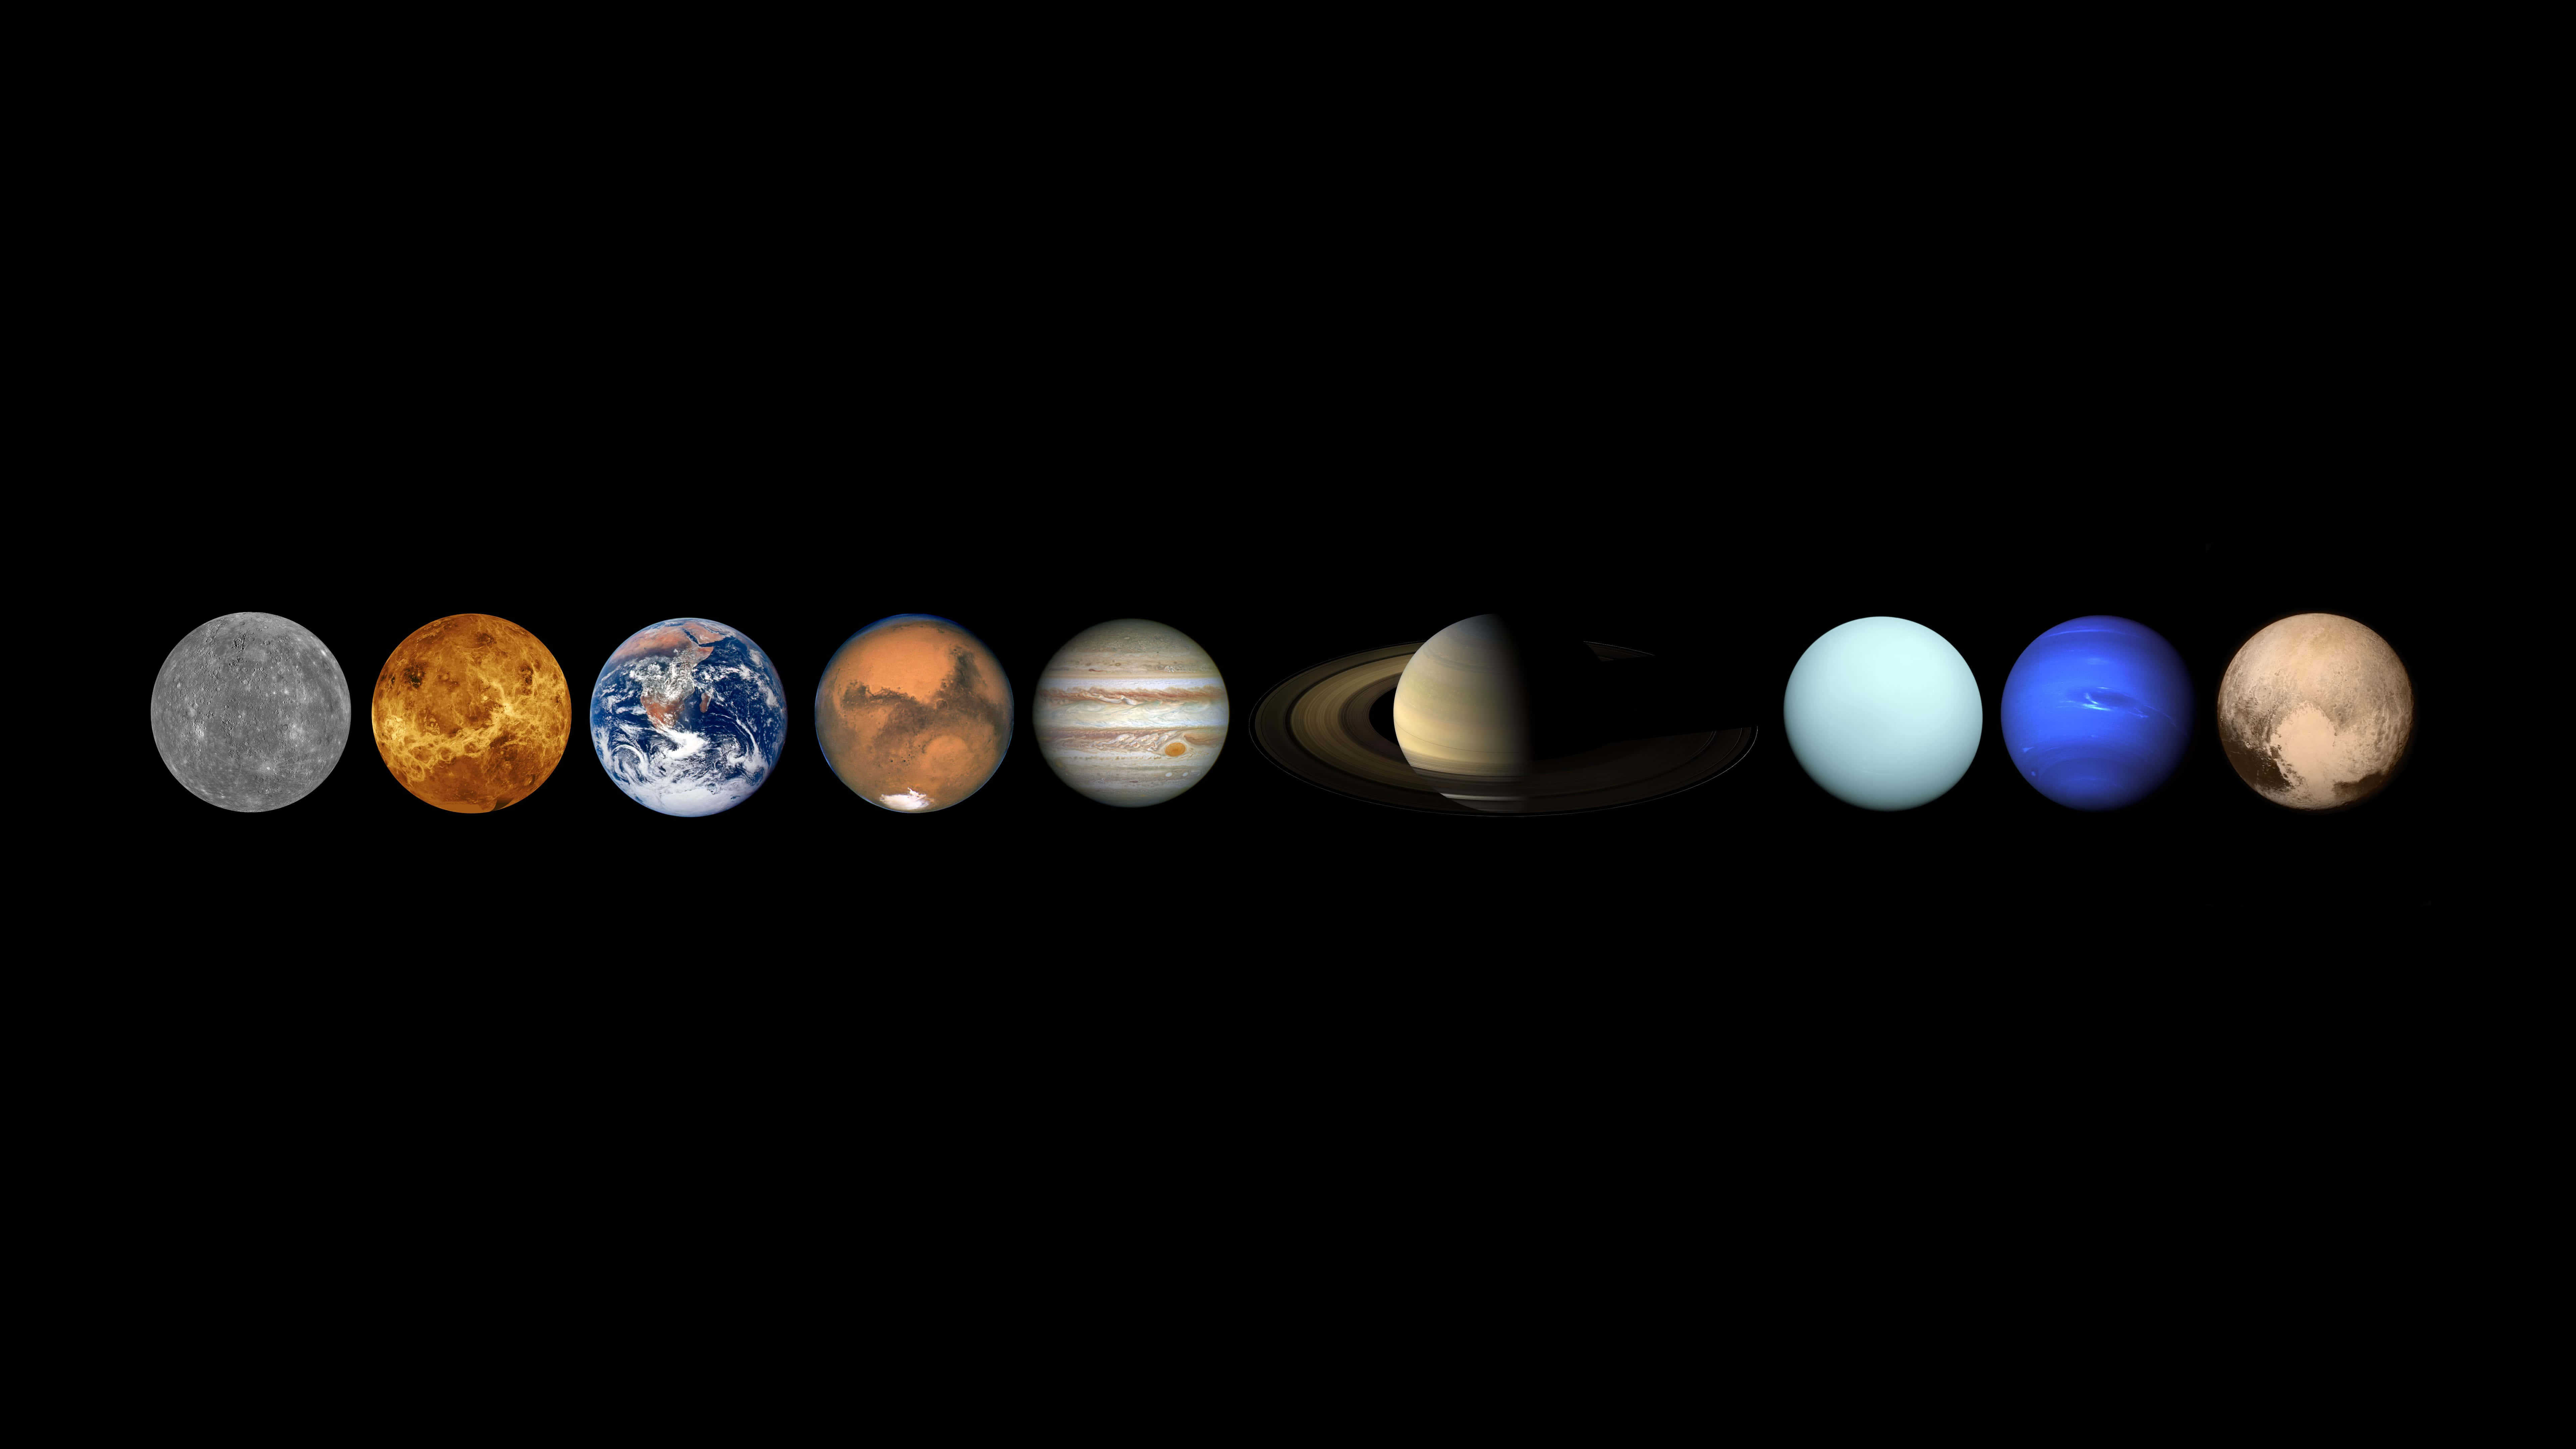 7680x4320 Planets In Our Solar System Uhd 8k Wallpaper